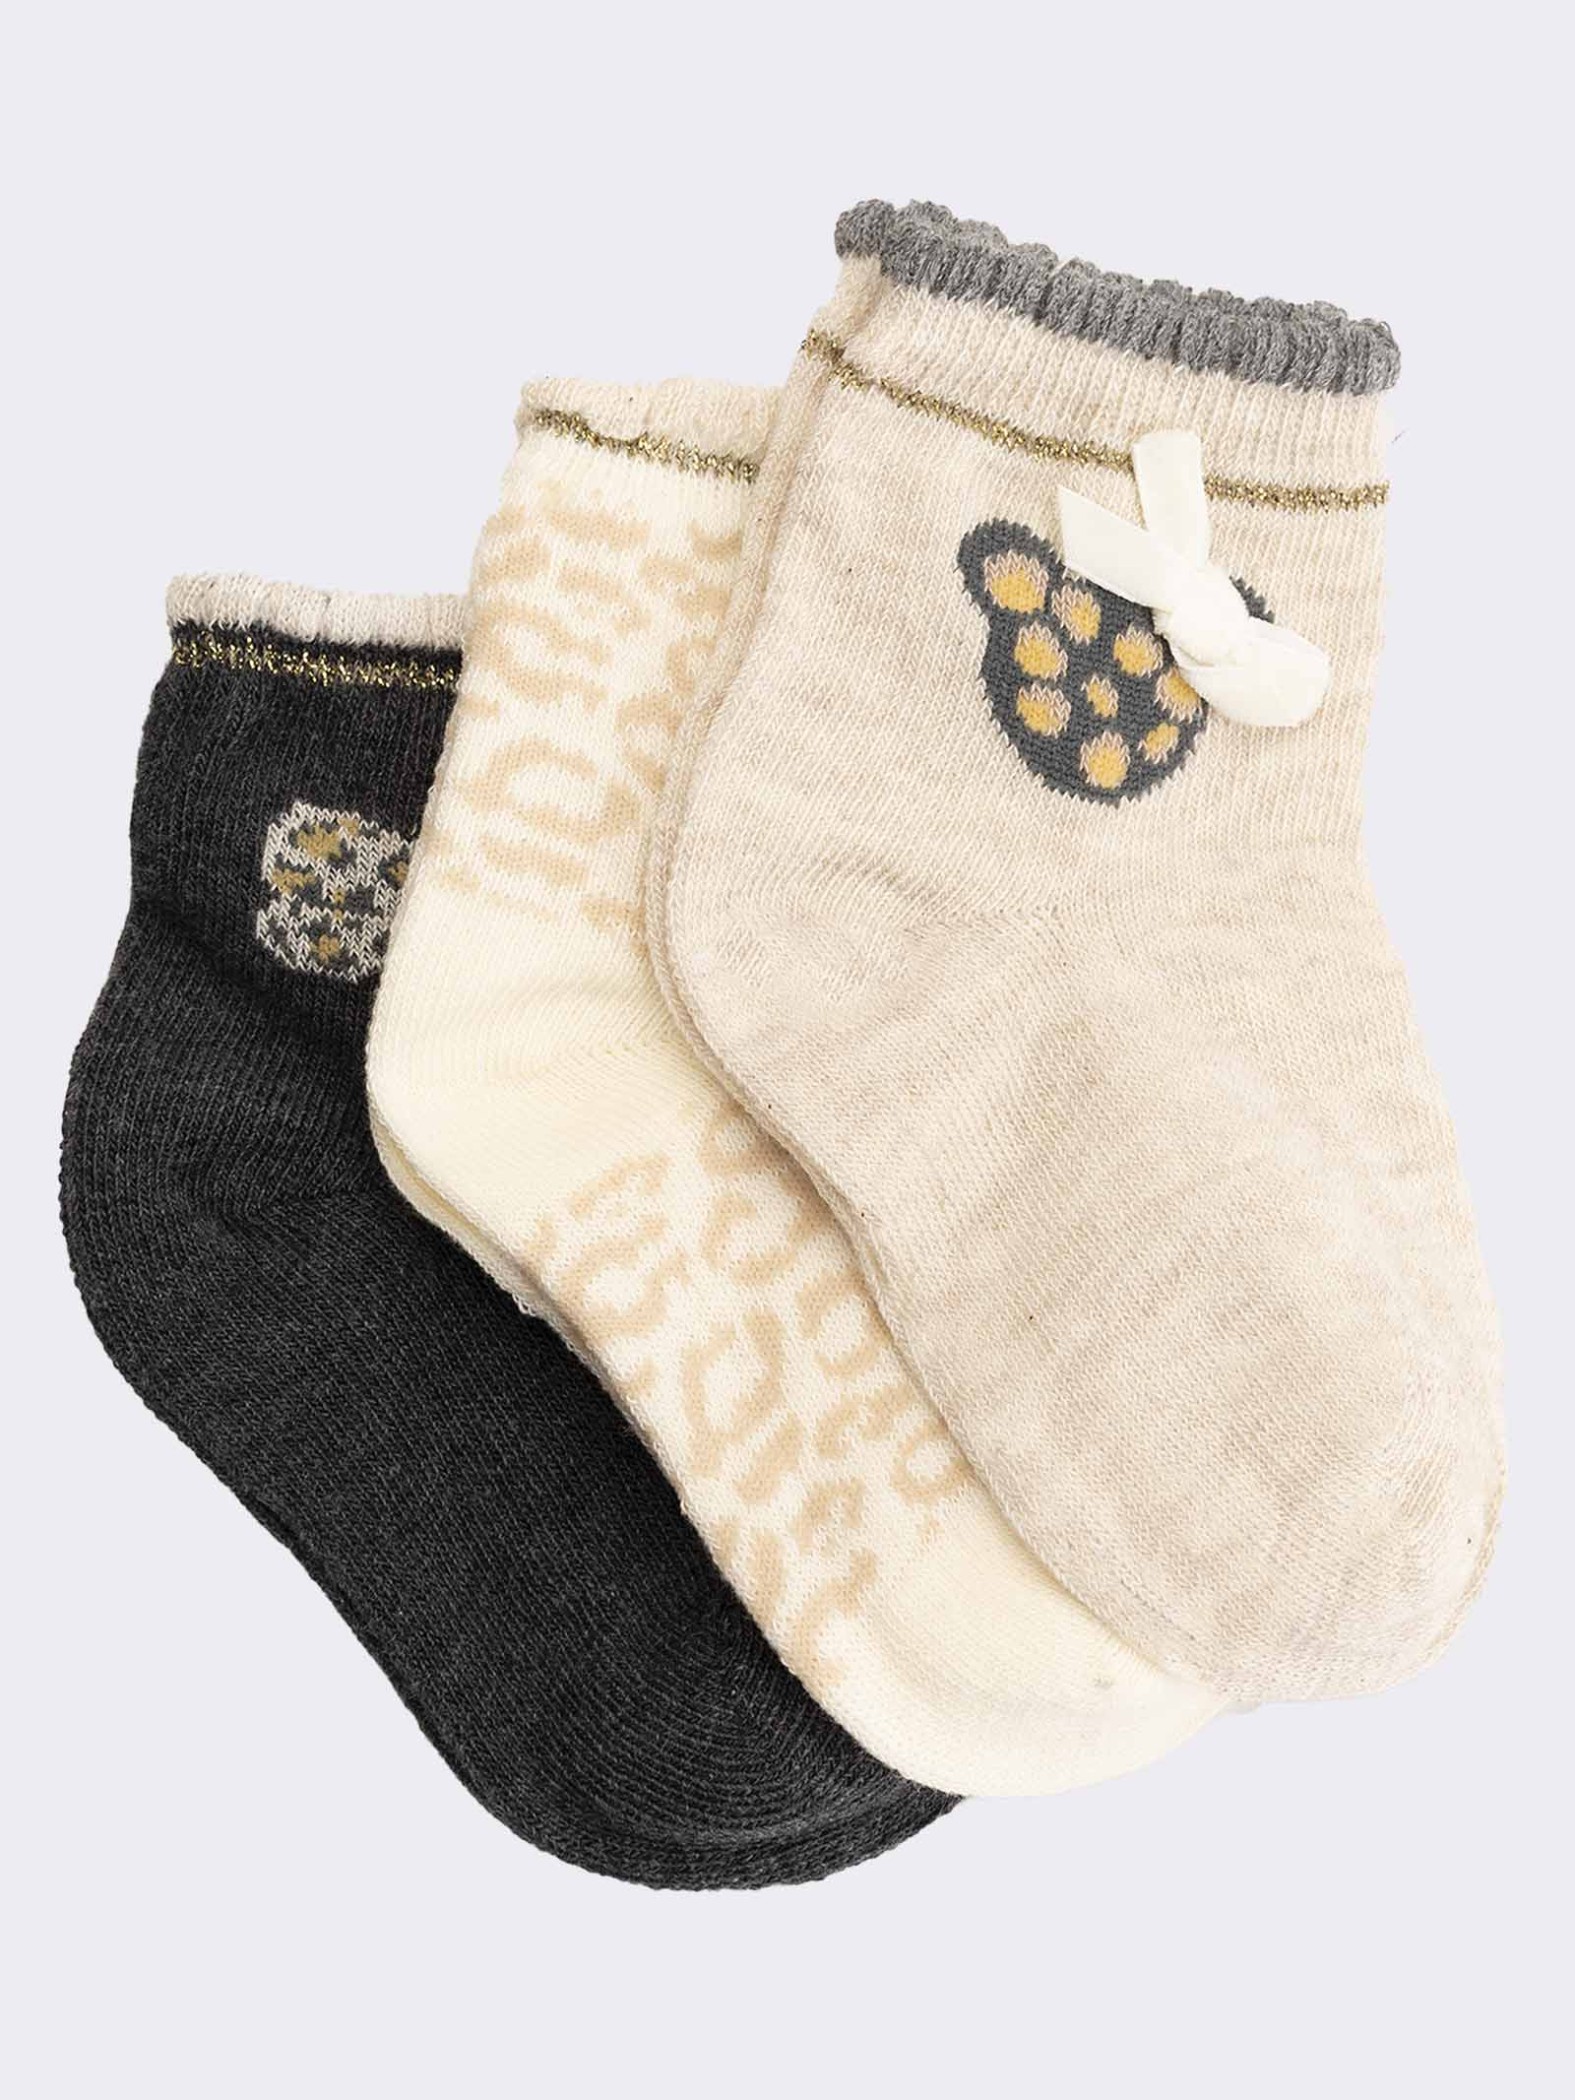 Three animal patterned baby girl socks in warm cotton